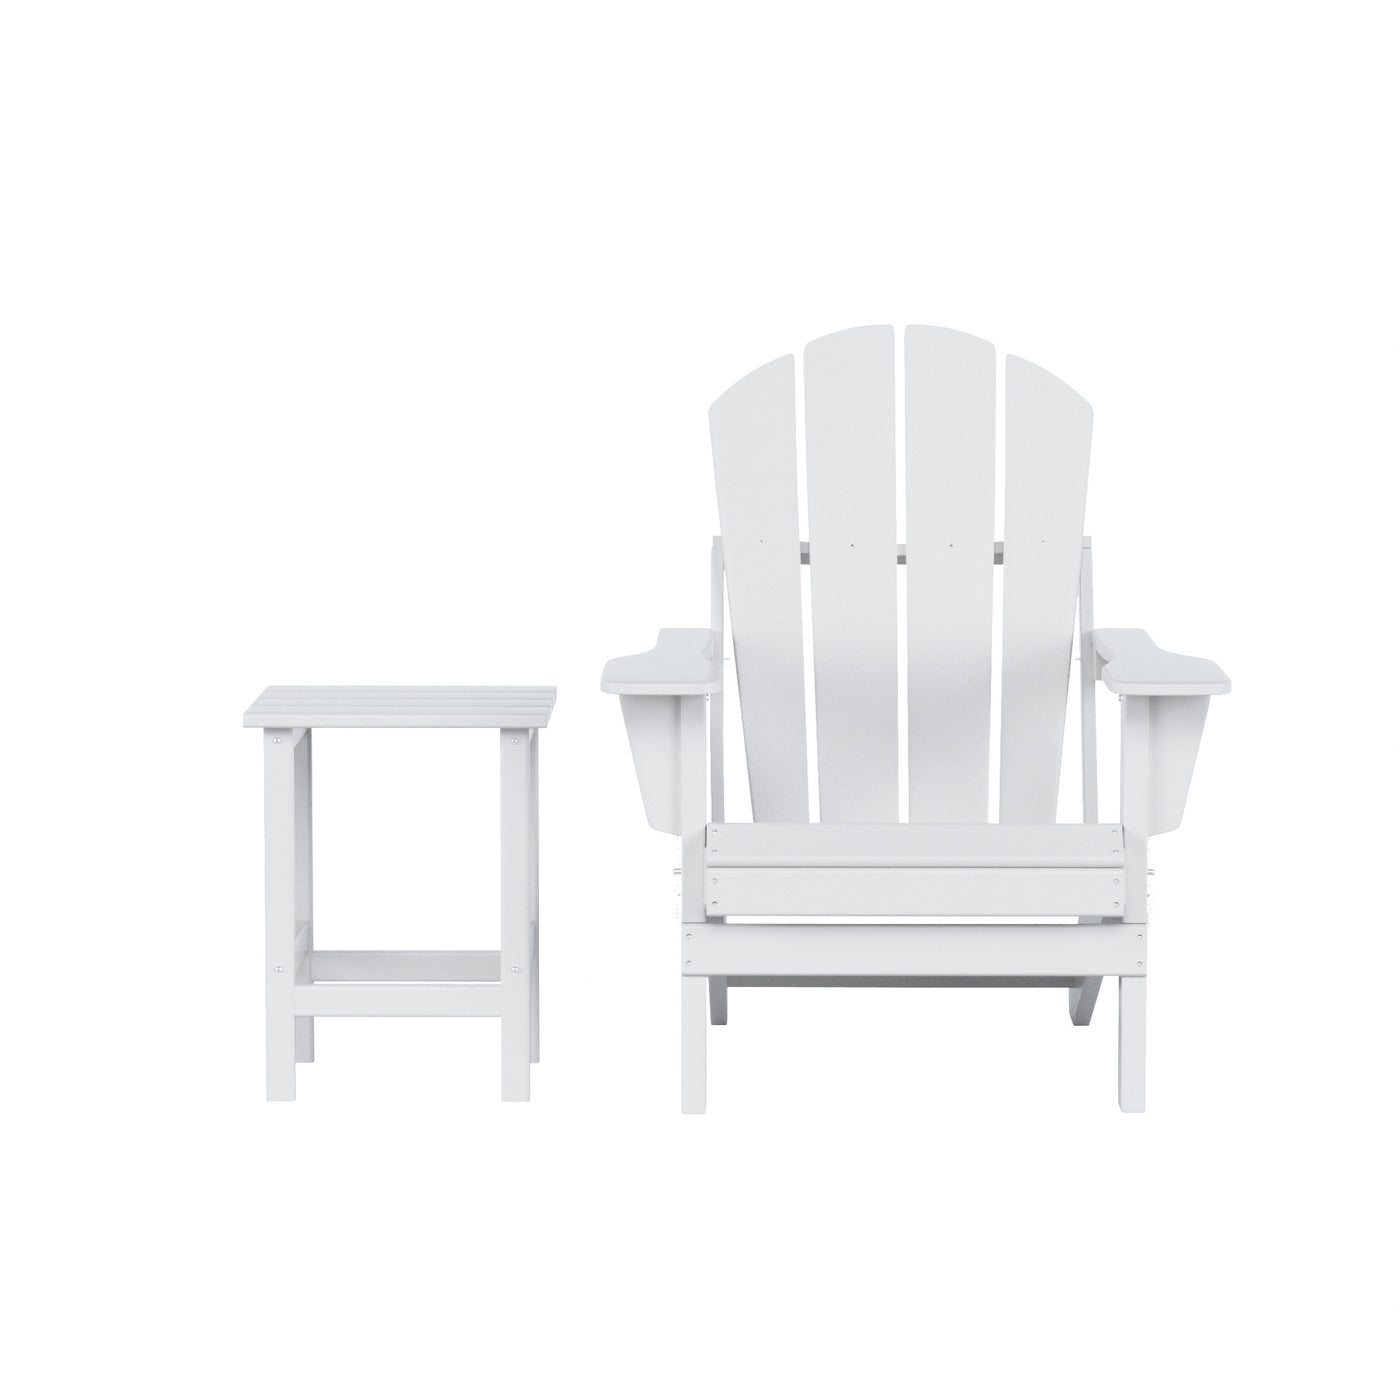 Malibu Outdoor Folding Poly Adirondack Chair with Side Table Set